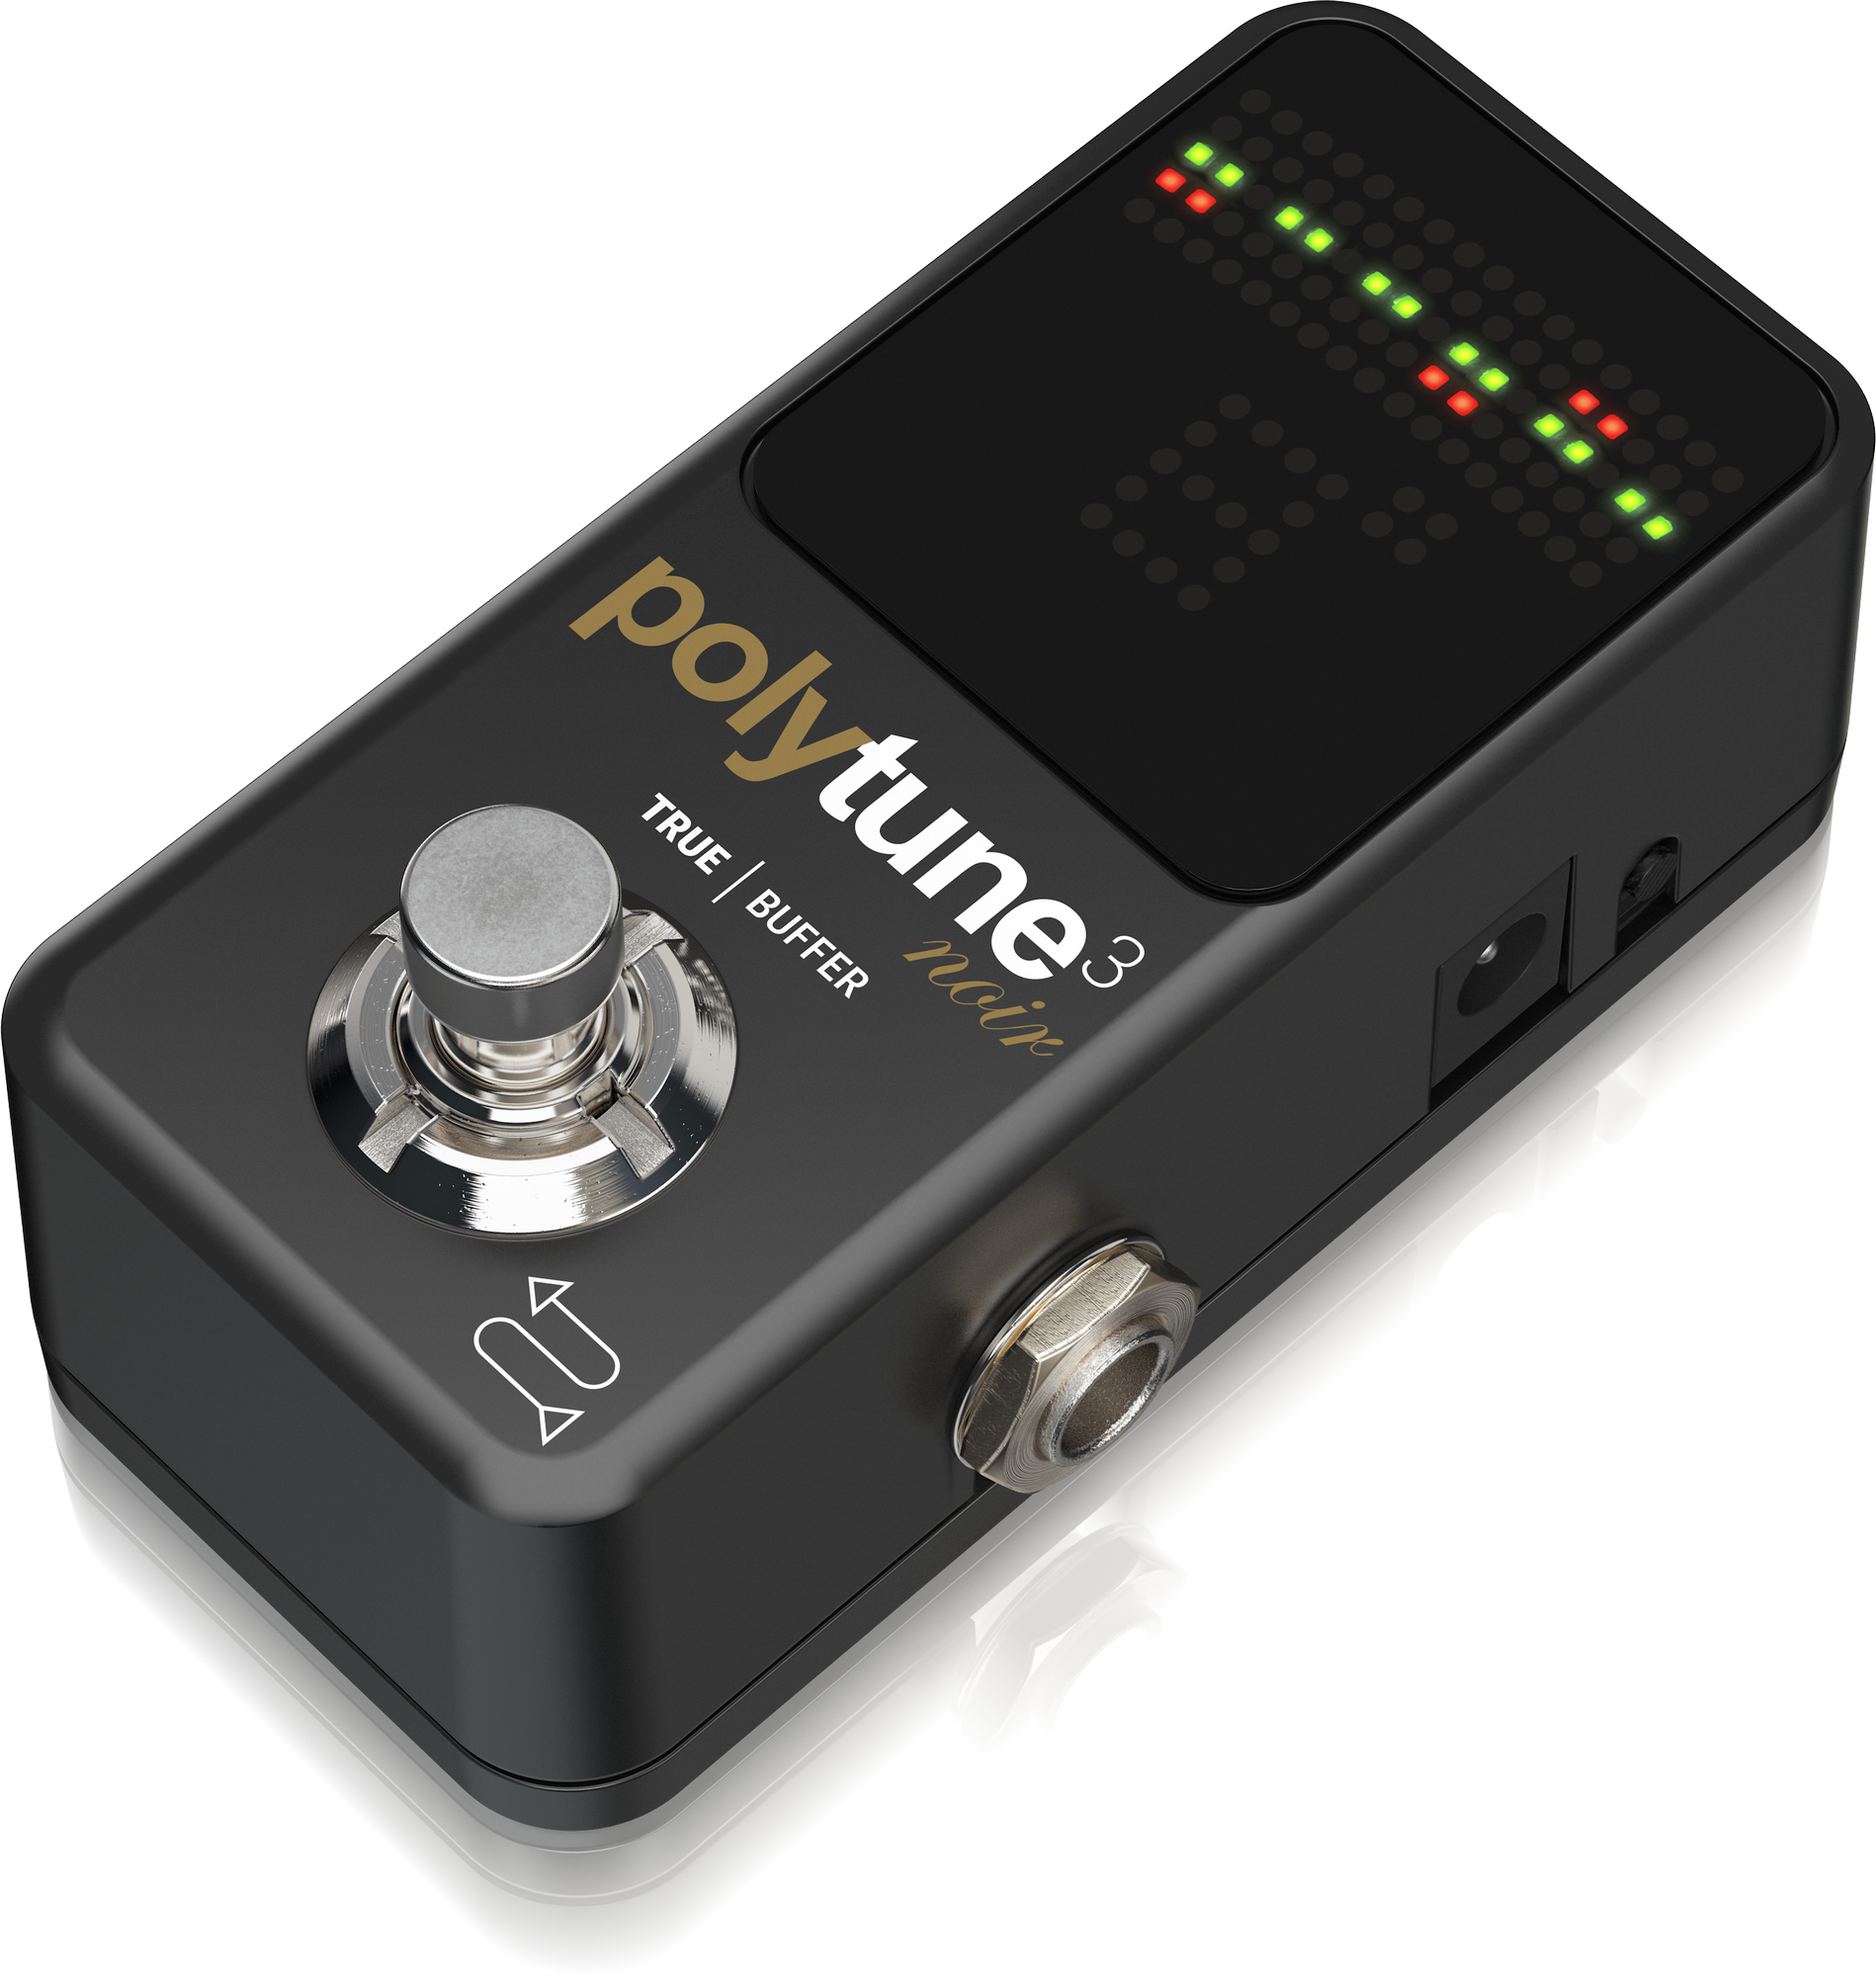 TC Electronic Polytune 3 Noir Tiny Polyphonic Tuner With Multiple Tuning Modes And Built-in Bonafide Buffer, TC ELECTRONIC, TUNER & METRONOME, tc-electronic-tuner-metronome-tc-polytune-3-noir, ZOSO MUSIC SDN BHD